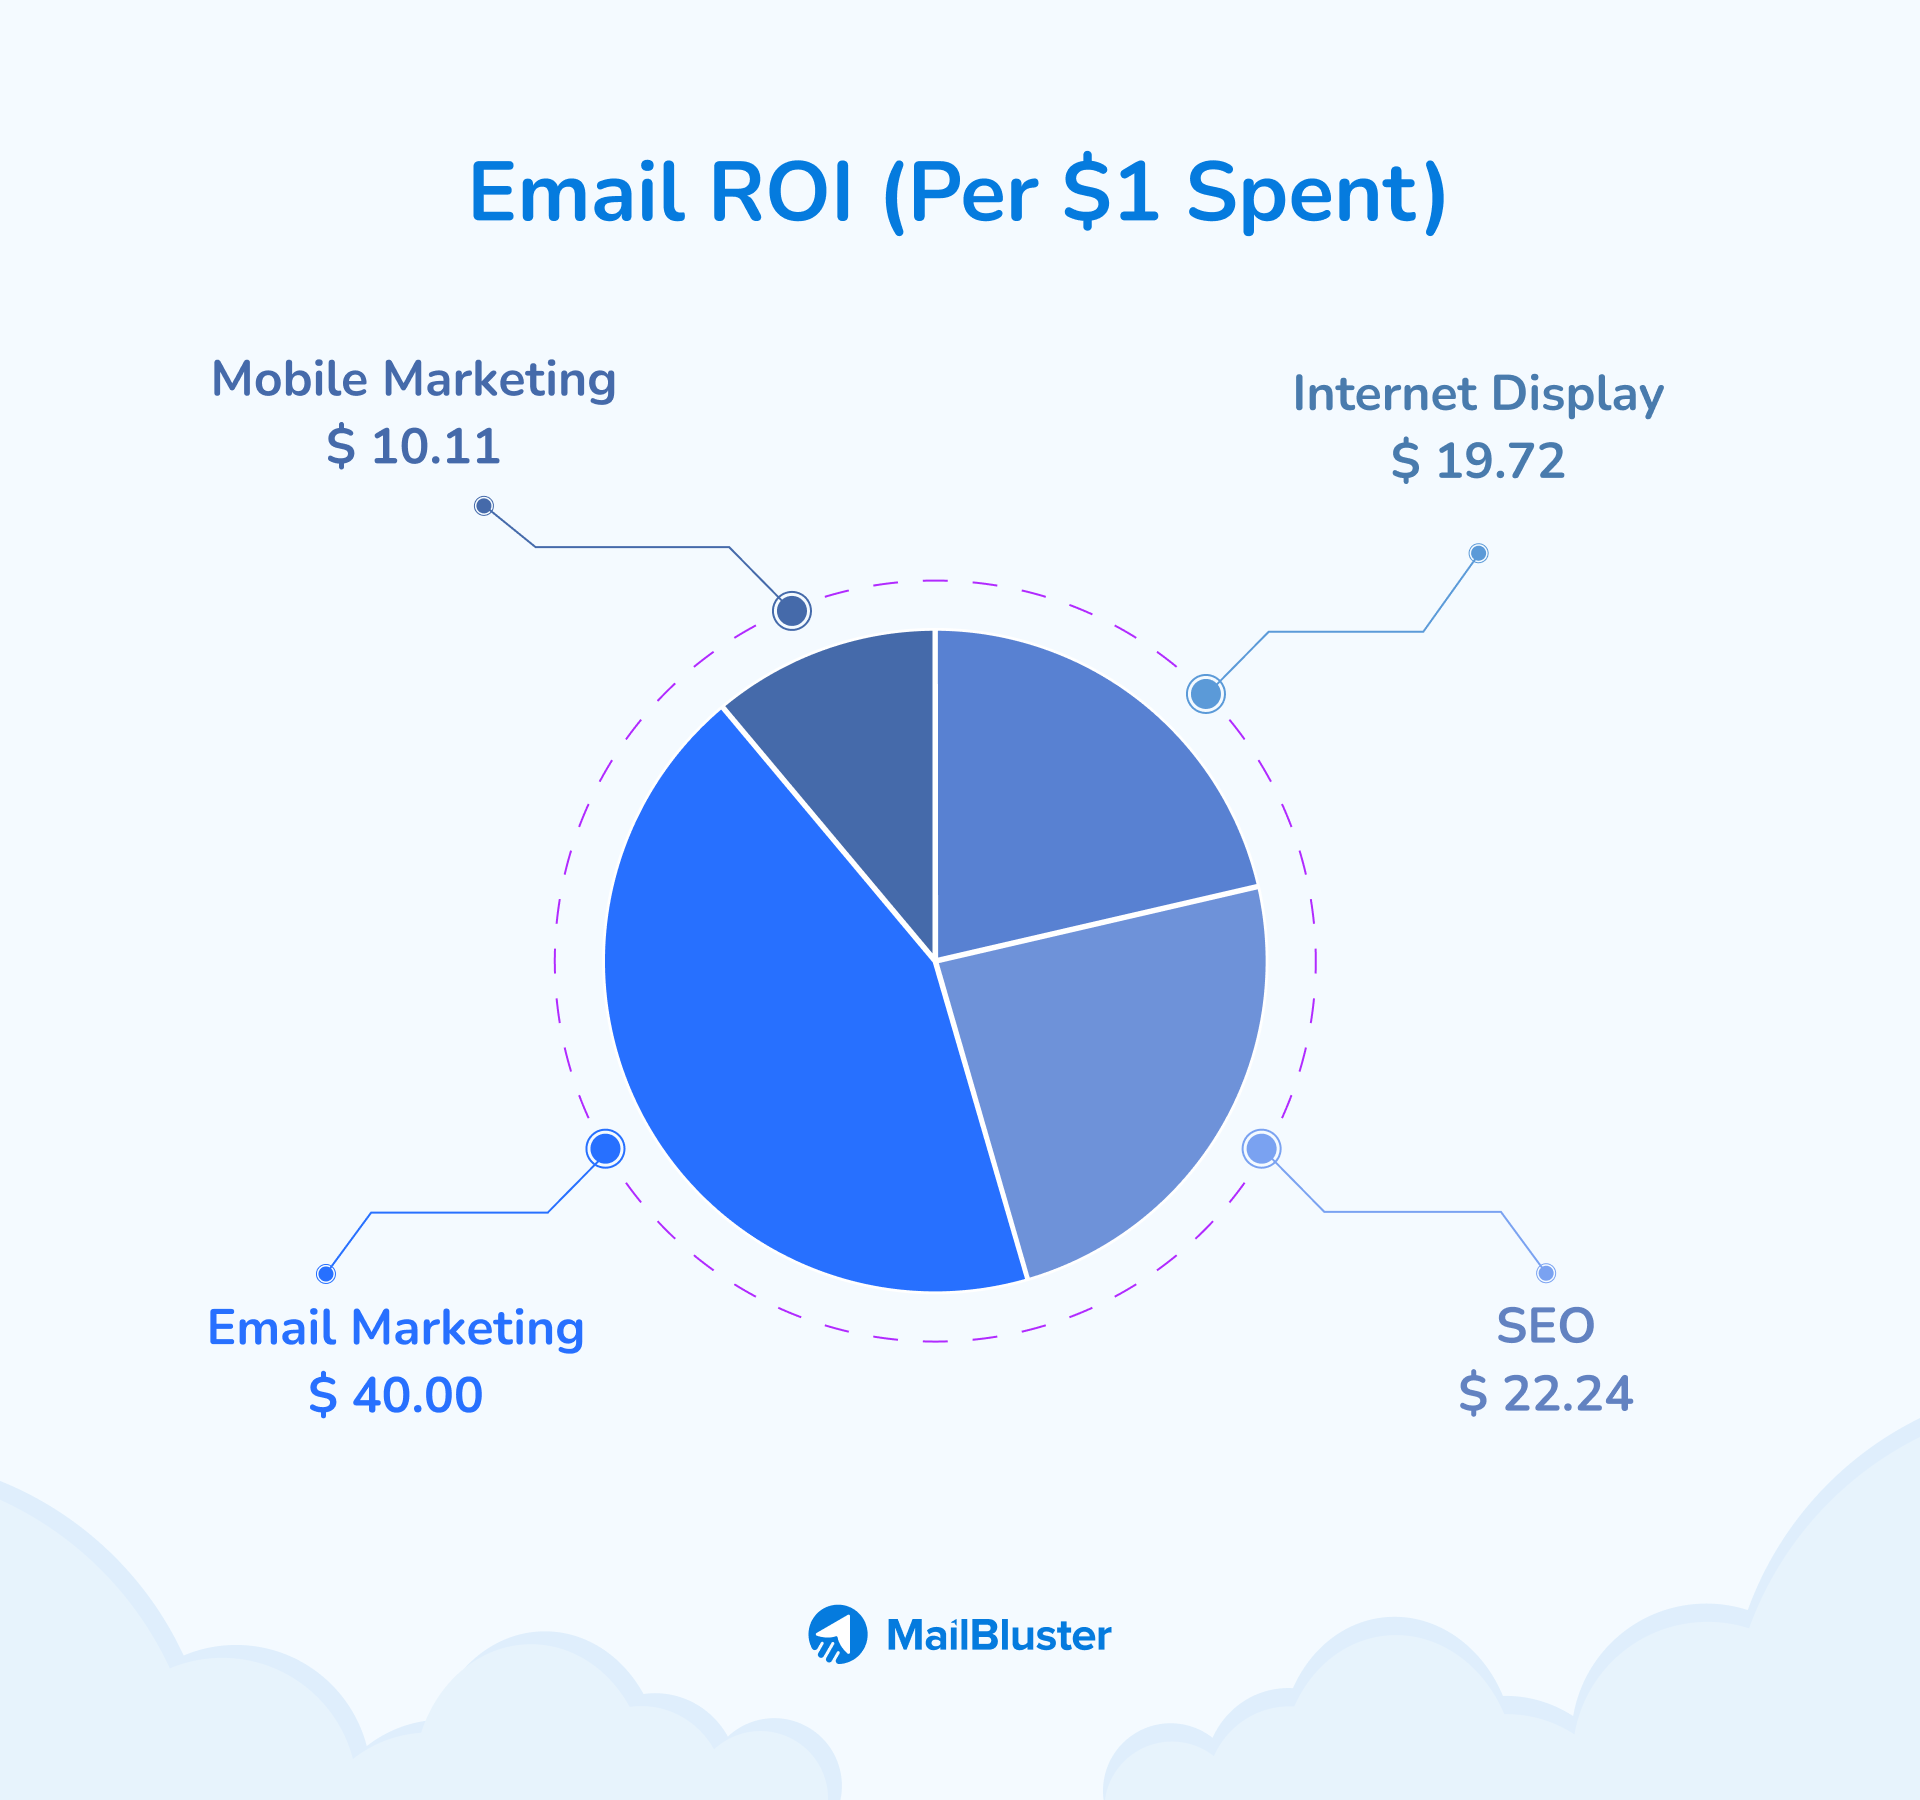 Email marketing statistics. Email marketing has the highest return on investment (ROI).